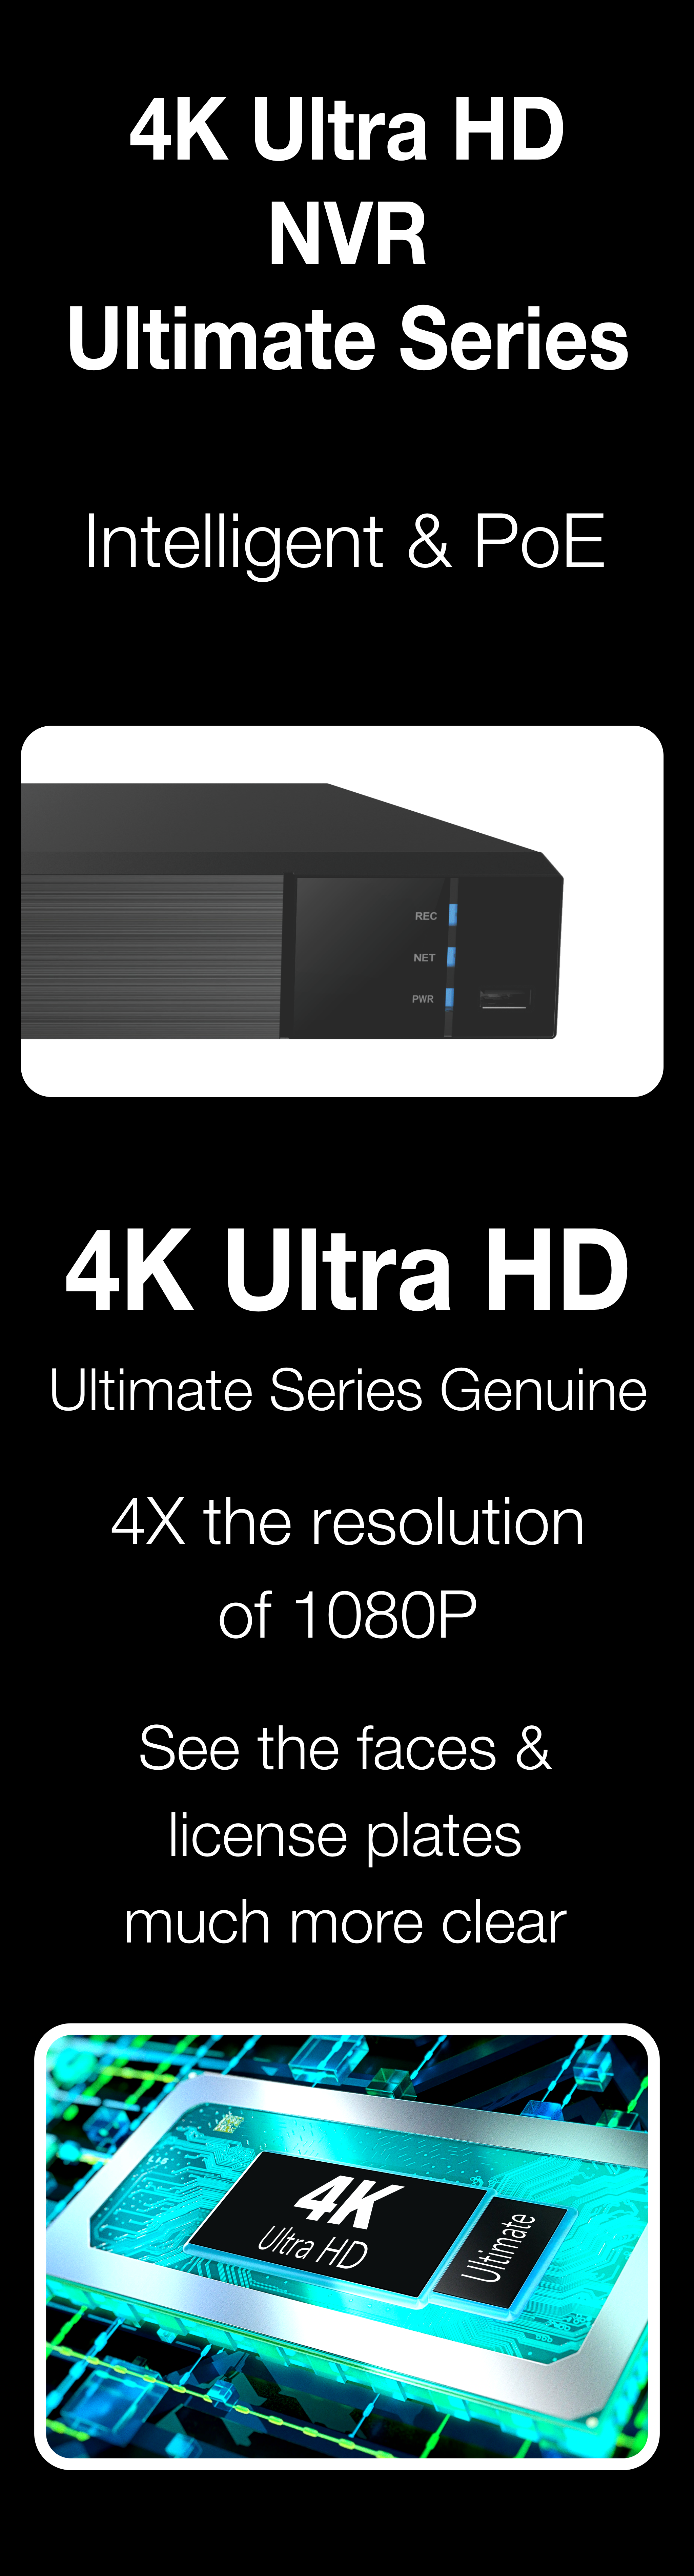 Elder 4K NVR security PoE 8MP Ultimate-I series supports IP cameras up to 4K Ultra HD 8MP resolution. It's 8 megapixel Ultra HD 4x the resolution of full HD 1080p.